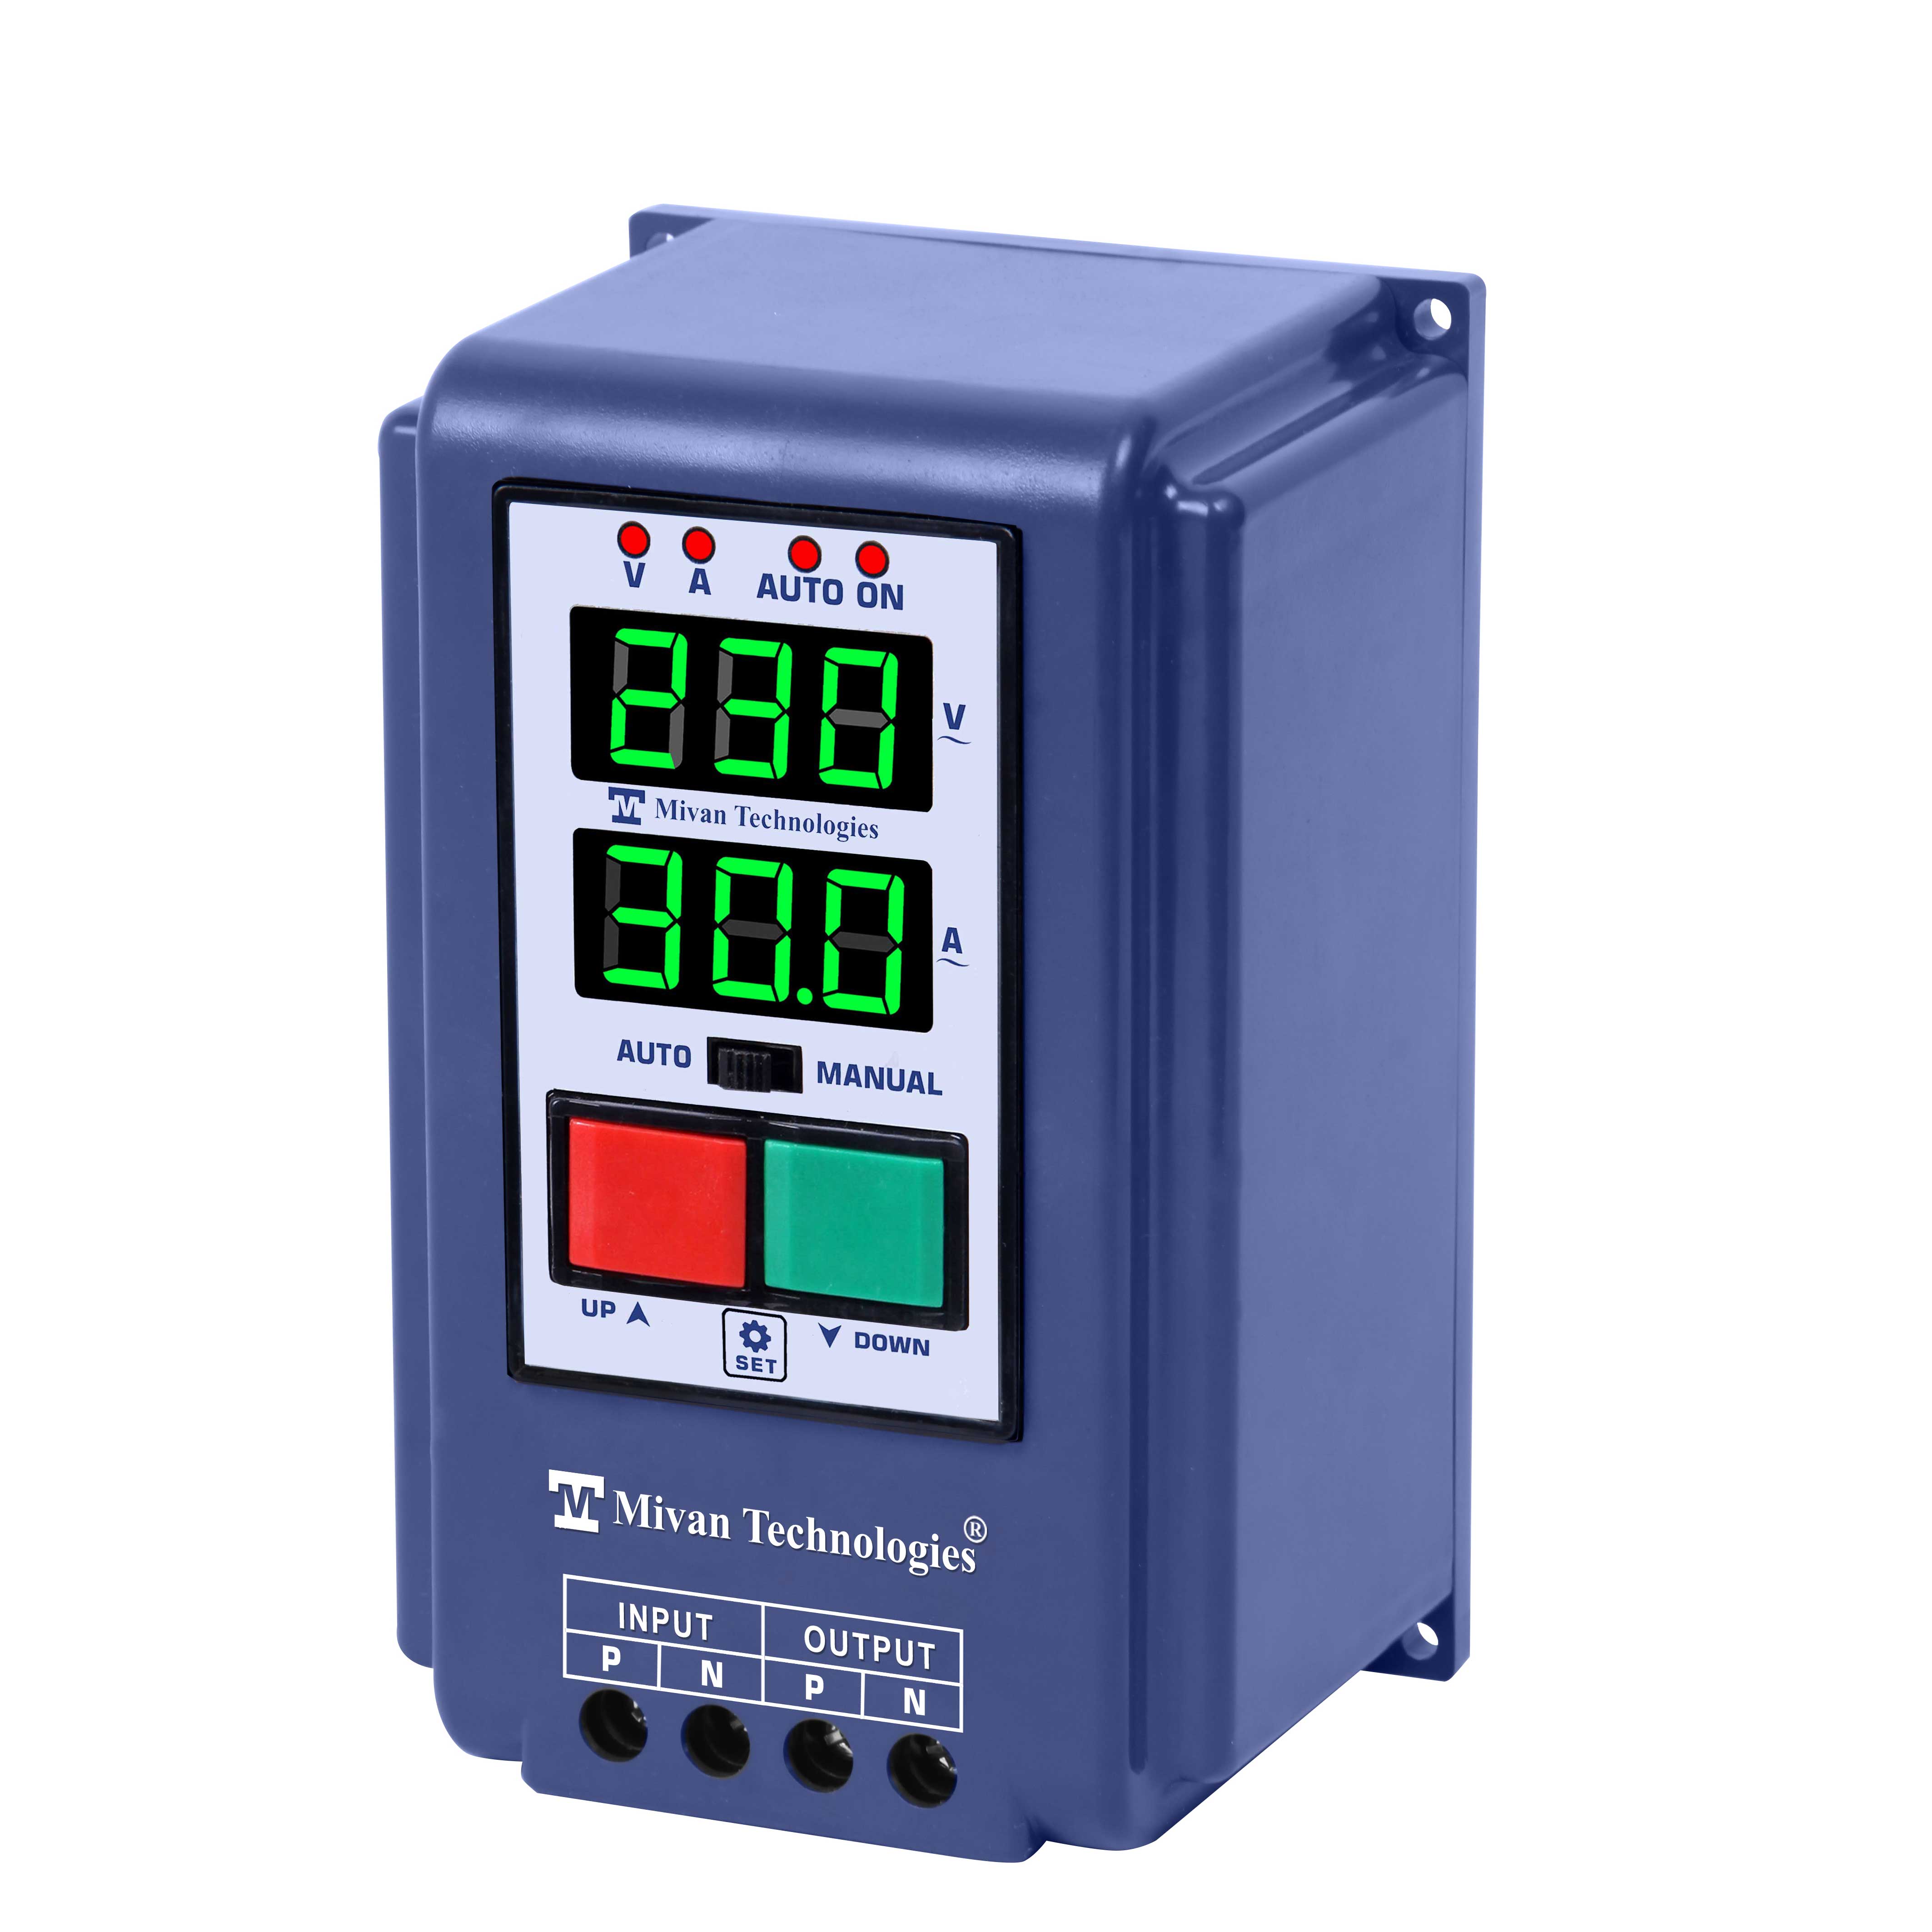 HD Single Phase Digital Overload Protection relay with HV LV OL and dry run protection cyclic timer suitable for all single phase appliances Suitable up to 3 hp motor DS